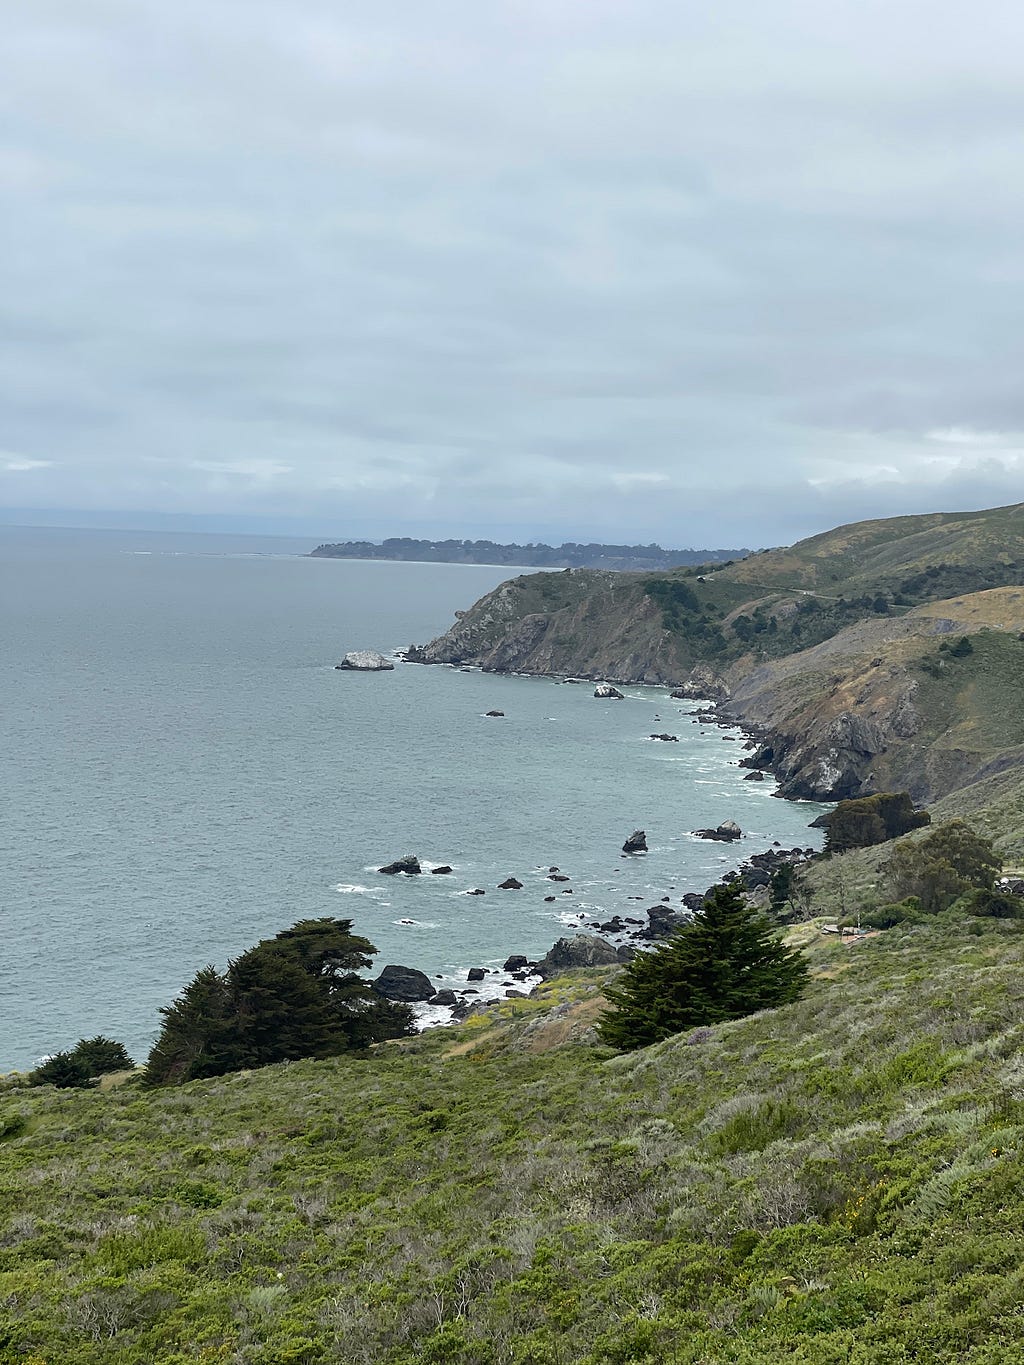 Pacific Ocean views, while driving on Highway 1